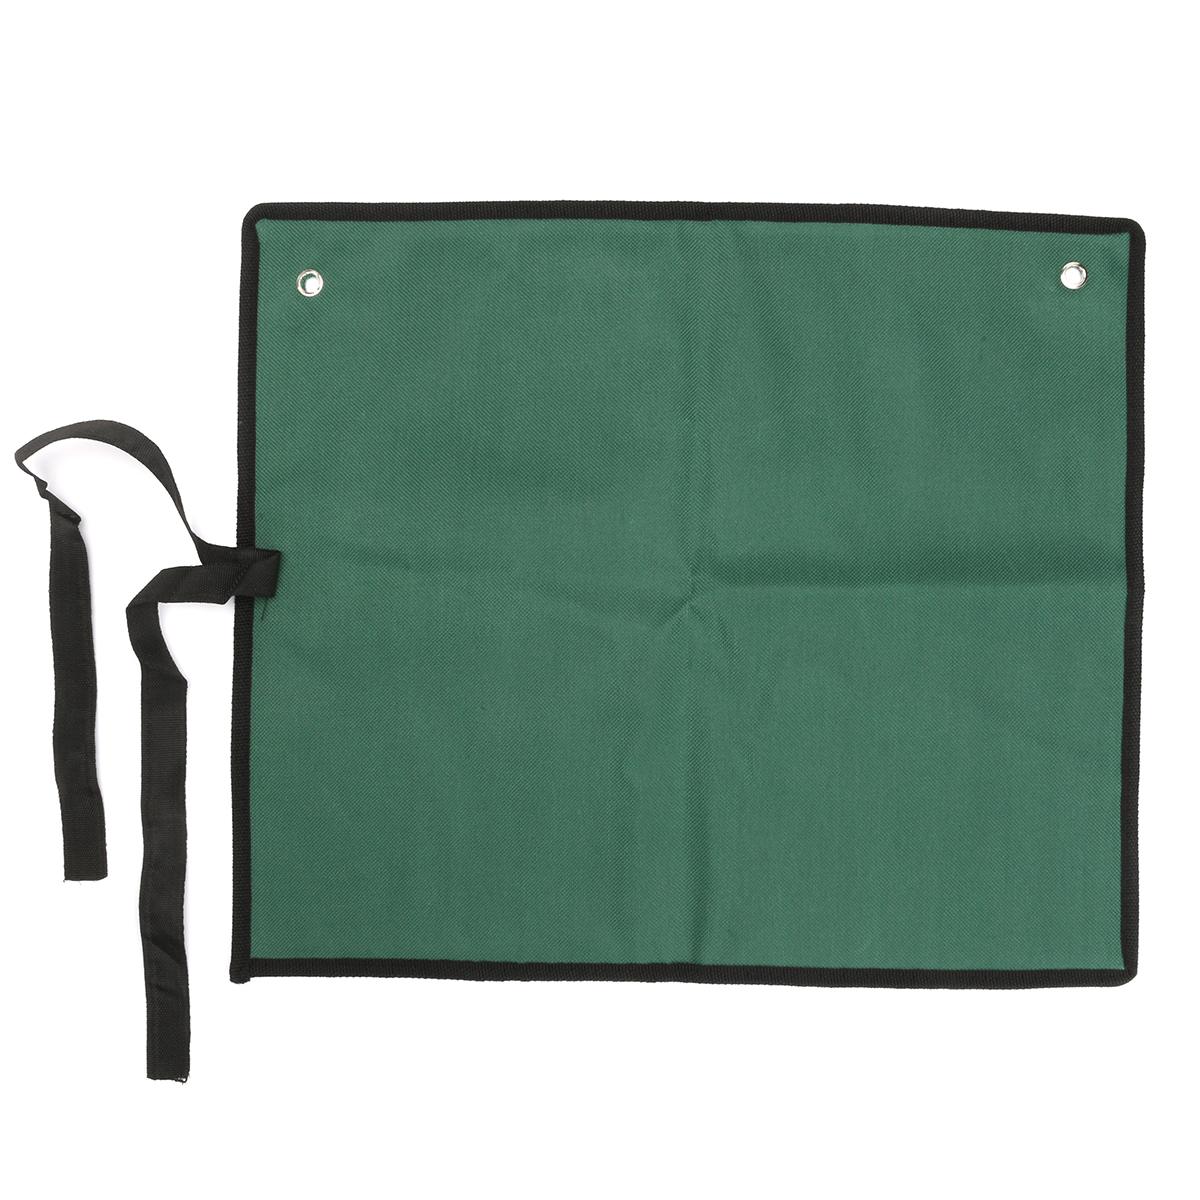 Canvas-Roll-Up-Tool-Storage-Bag-101420-Pocket-Spanner-Wrench-Organizer-Pouch-1288991-5